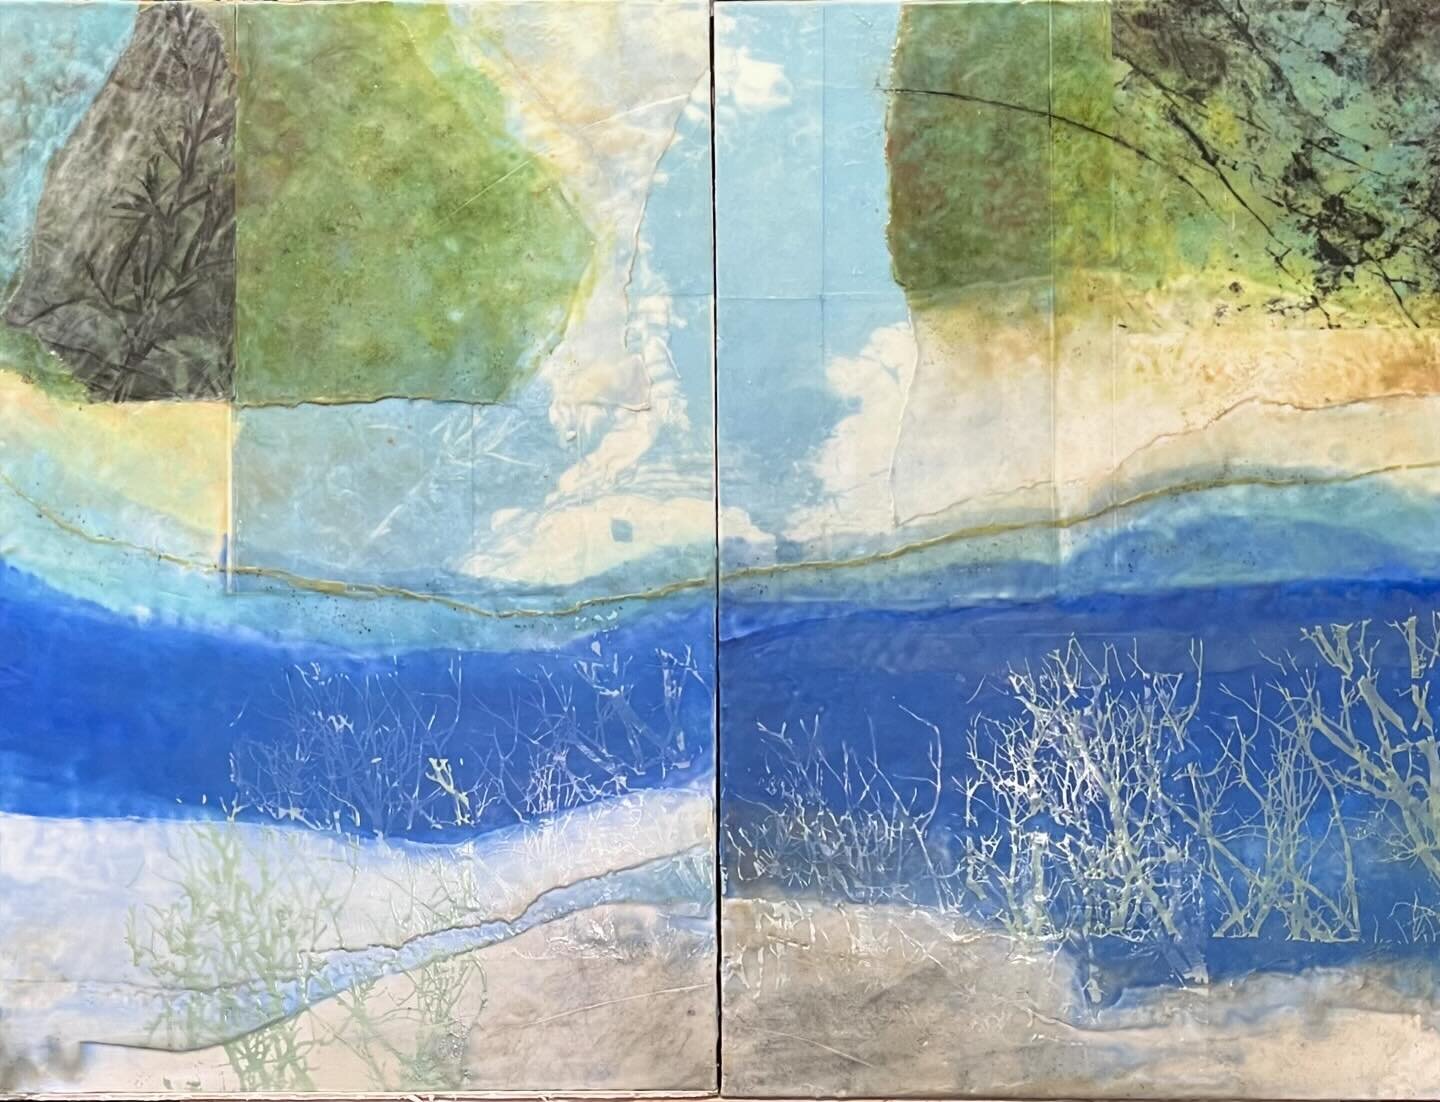 New painting and a detail . Working title: Water&rsquo;s Edge Revisited. 36 x 48 in. On two panels, probably display about an inch apart. Encaustic with inkjet print and silkscreen. I&rsquo;m drawn to the Water&rsquo;s Edge again, maybe contemplating